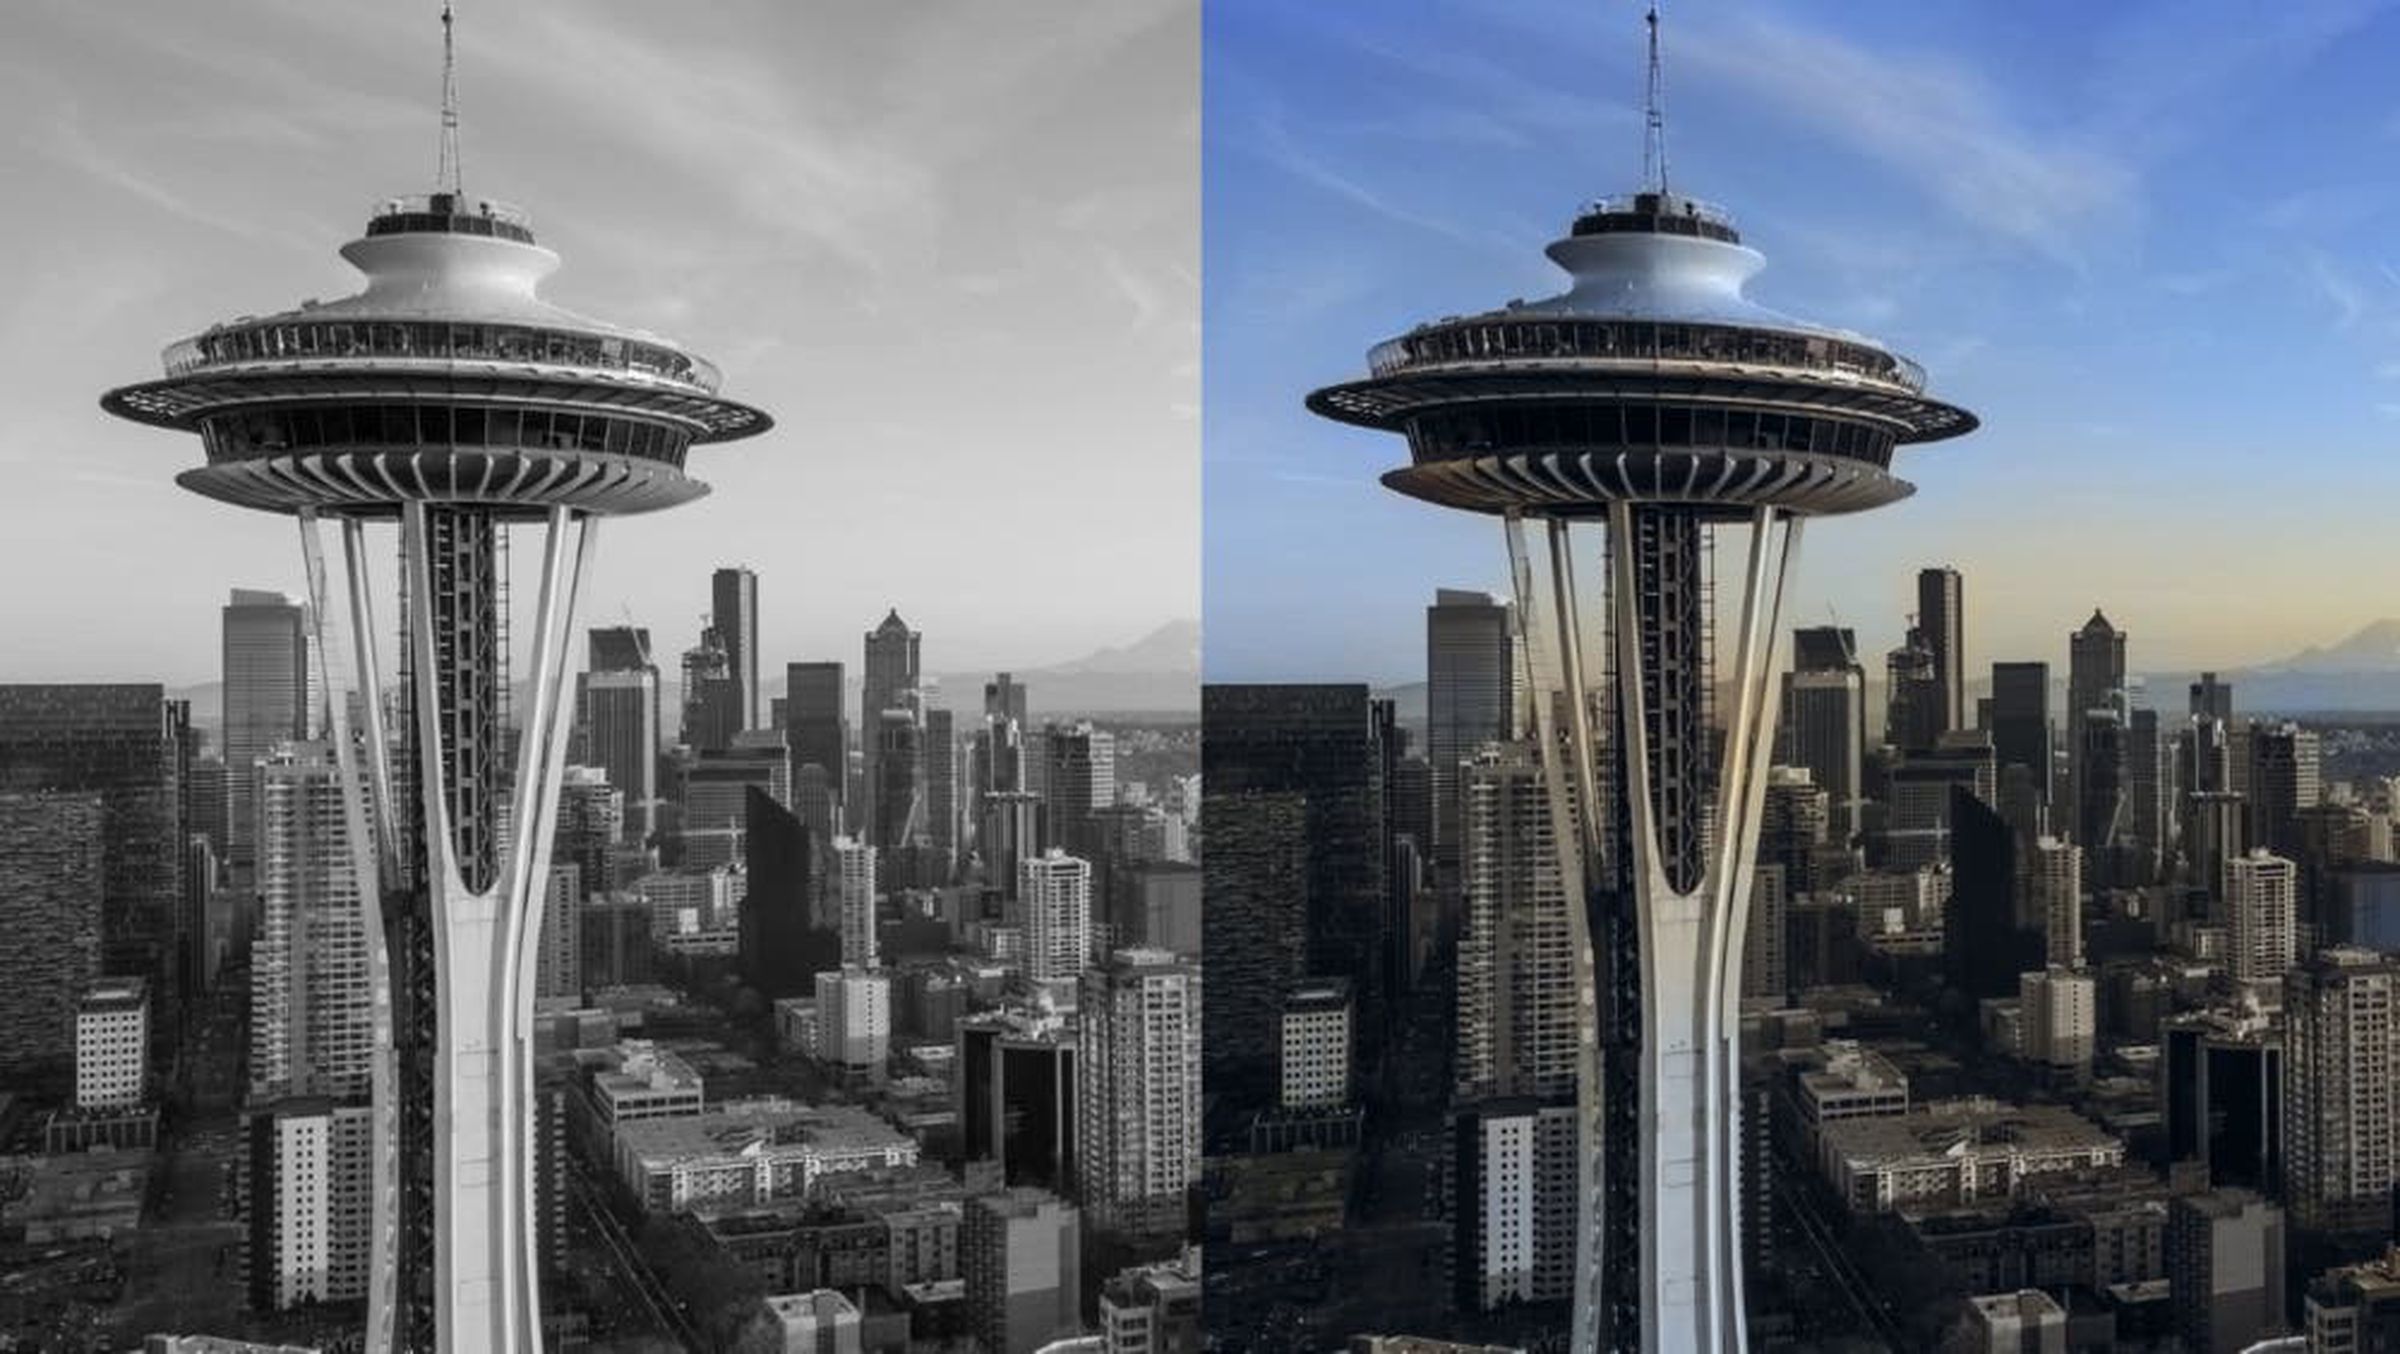 Neural filters can be used to colorize old photos — a popular application of machine learning. 